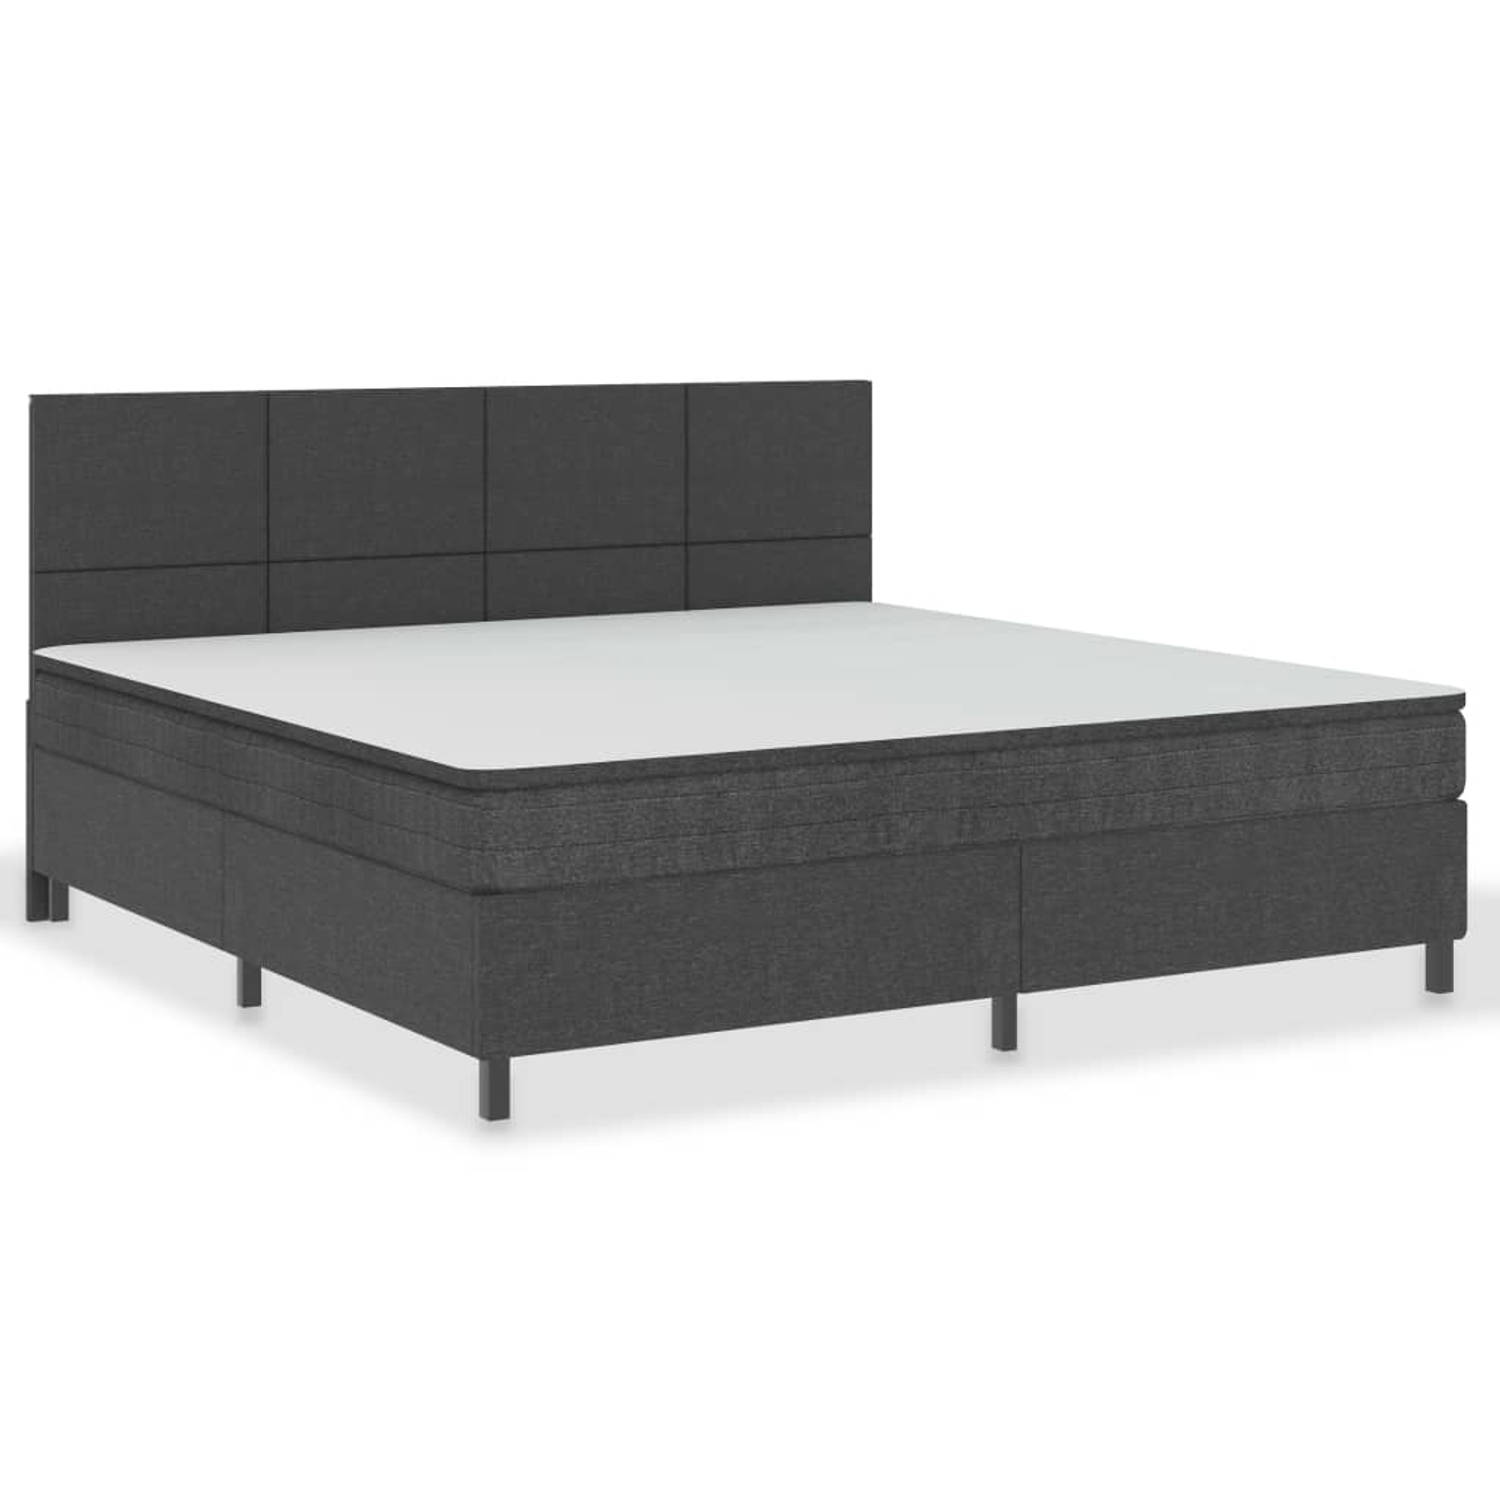 The Living Store Boxspring stof donkergrijs 200x200 cm - Boxspring - Boxsprings - Boxspringbed - Boxspringbedden - Hotelbed - Hotelbedden - Bed - Bedden - Tweepersoonsbed - Tweeper